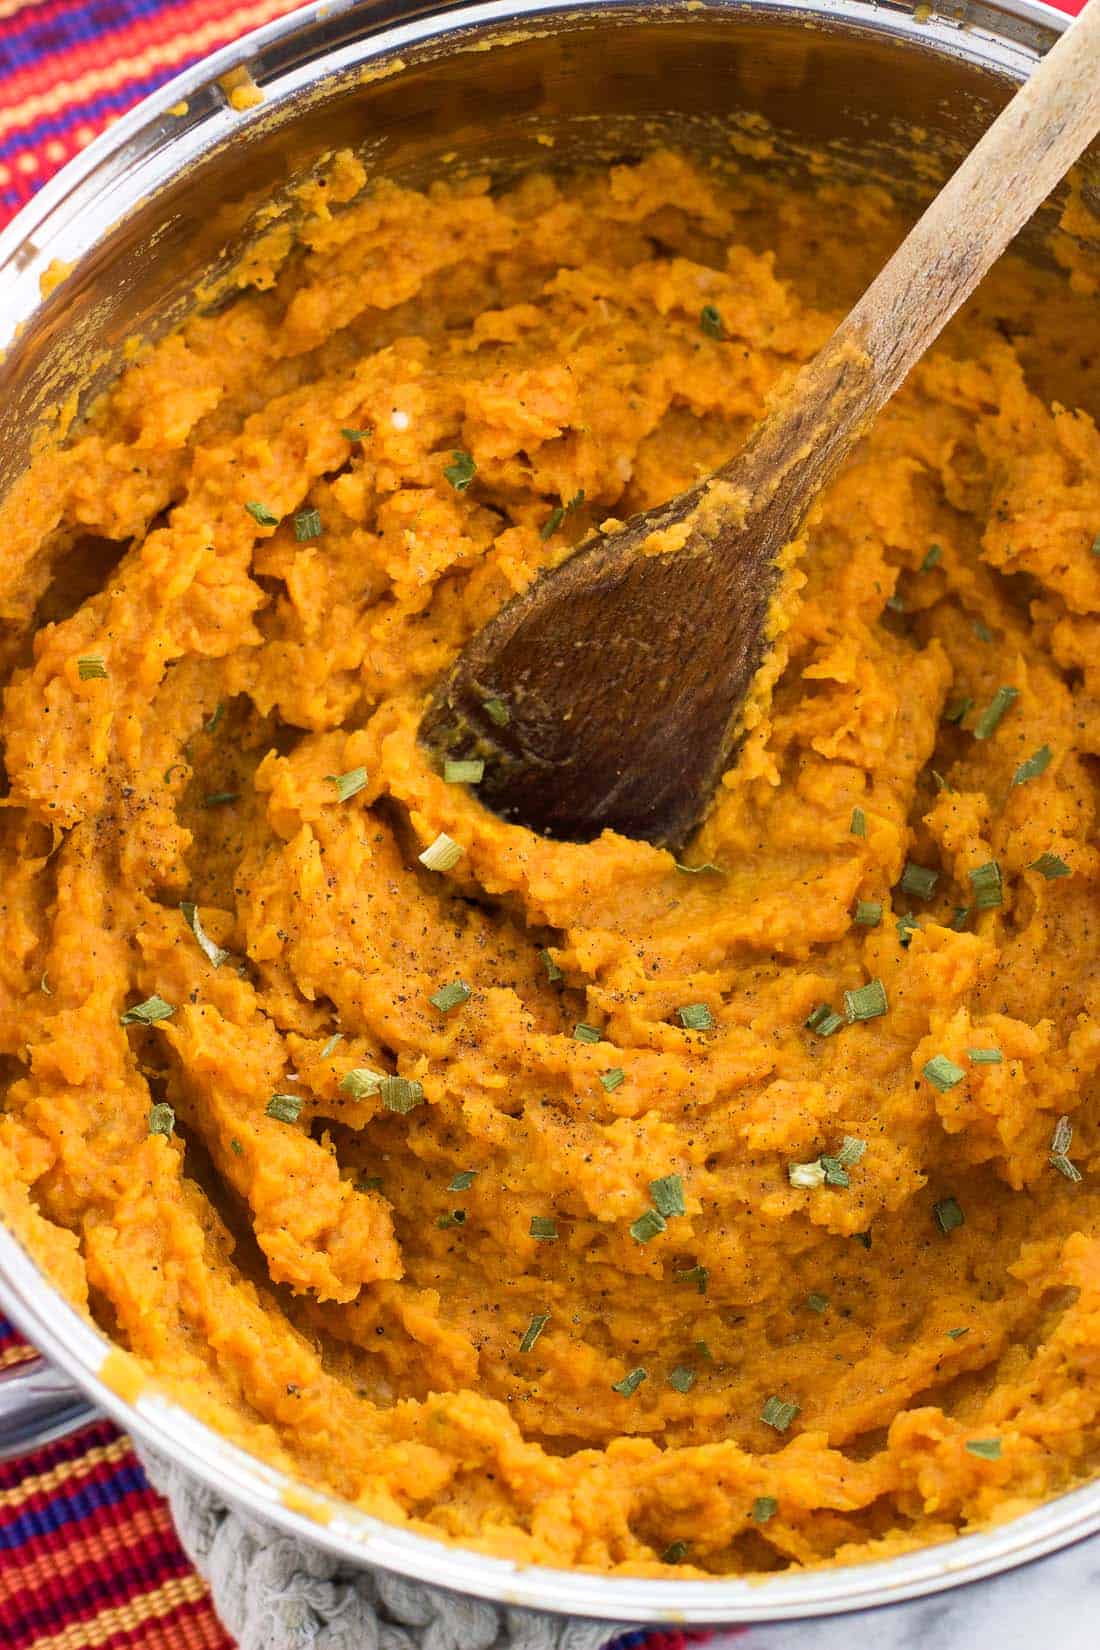 Mashed sweet potatoes in a pan with a wooden spoon and garnished with chives